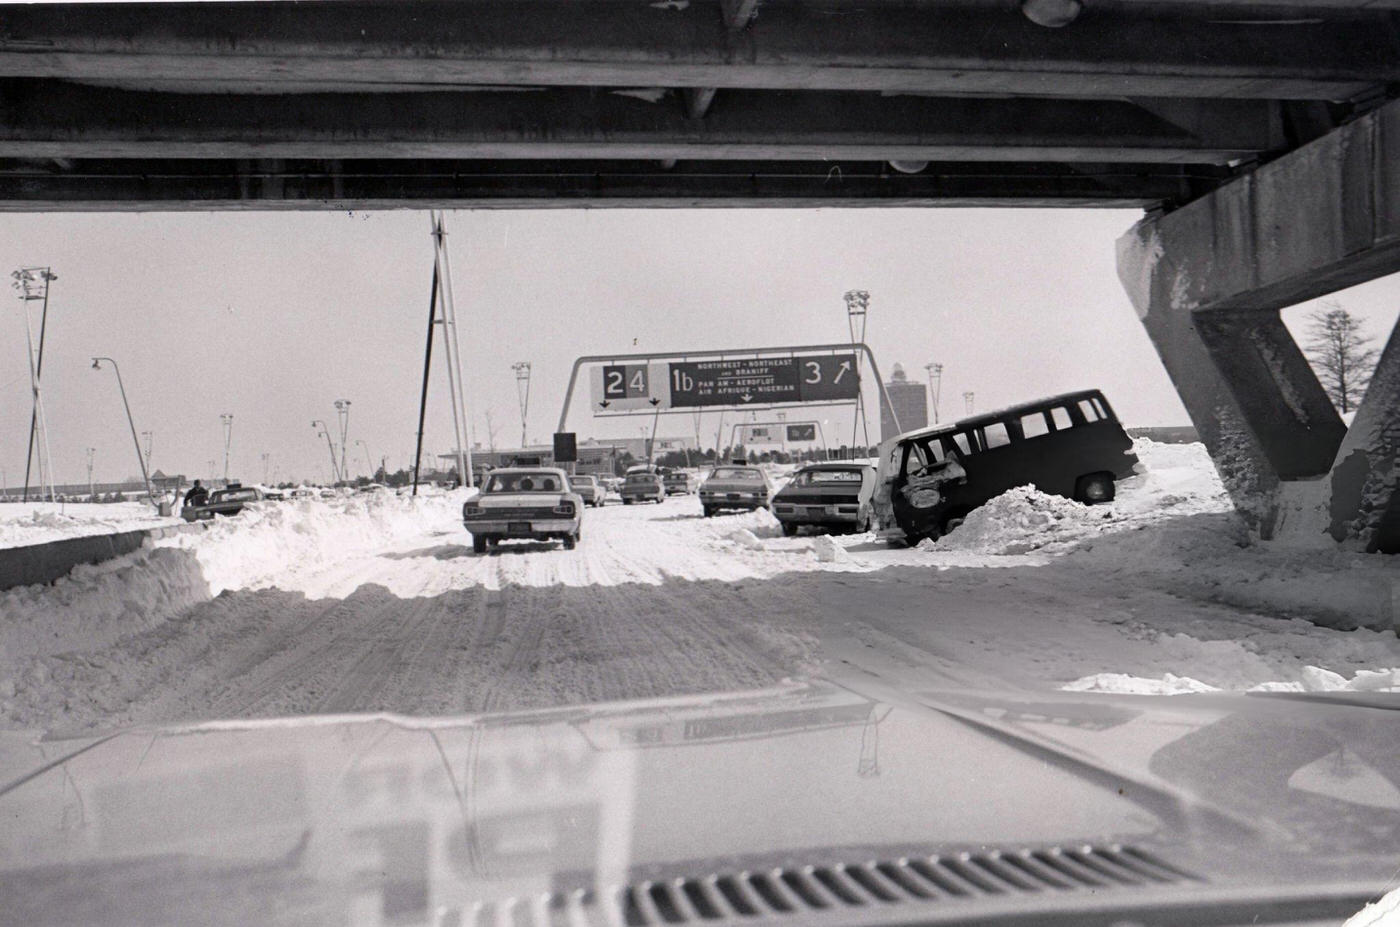 Entrances To The Belt Parkway In Queens Near Kennedy Airport Blocked By Stalled Cars Stuck In The Snow, 1969.